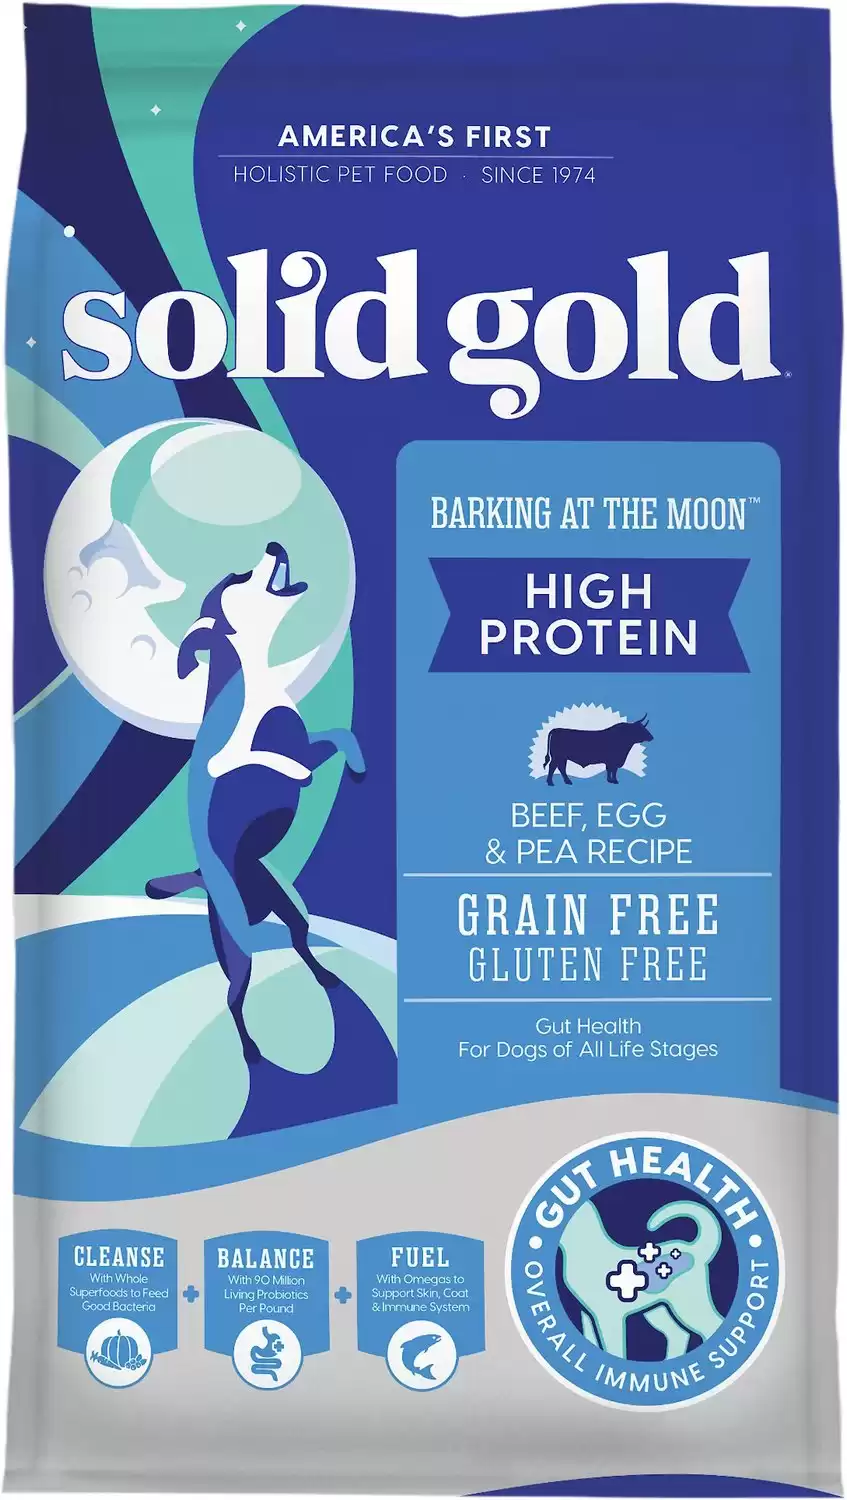 Solid Gold Barking at the Moon High Protein Dog Food